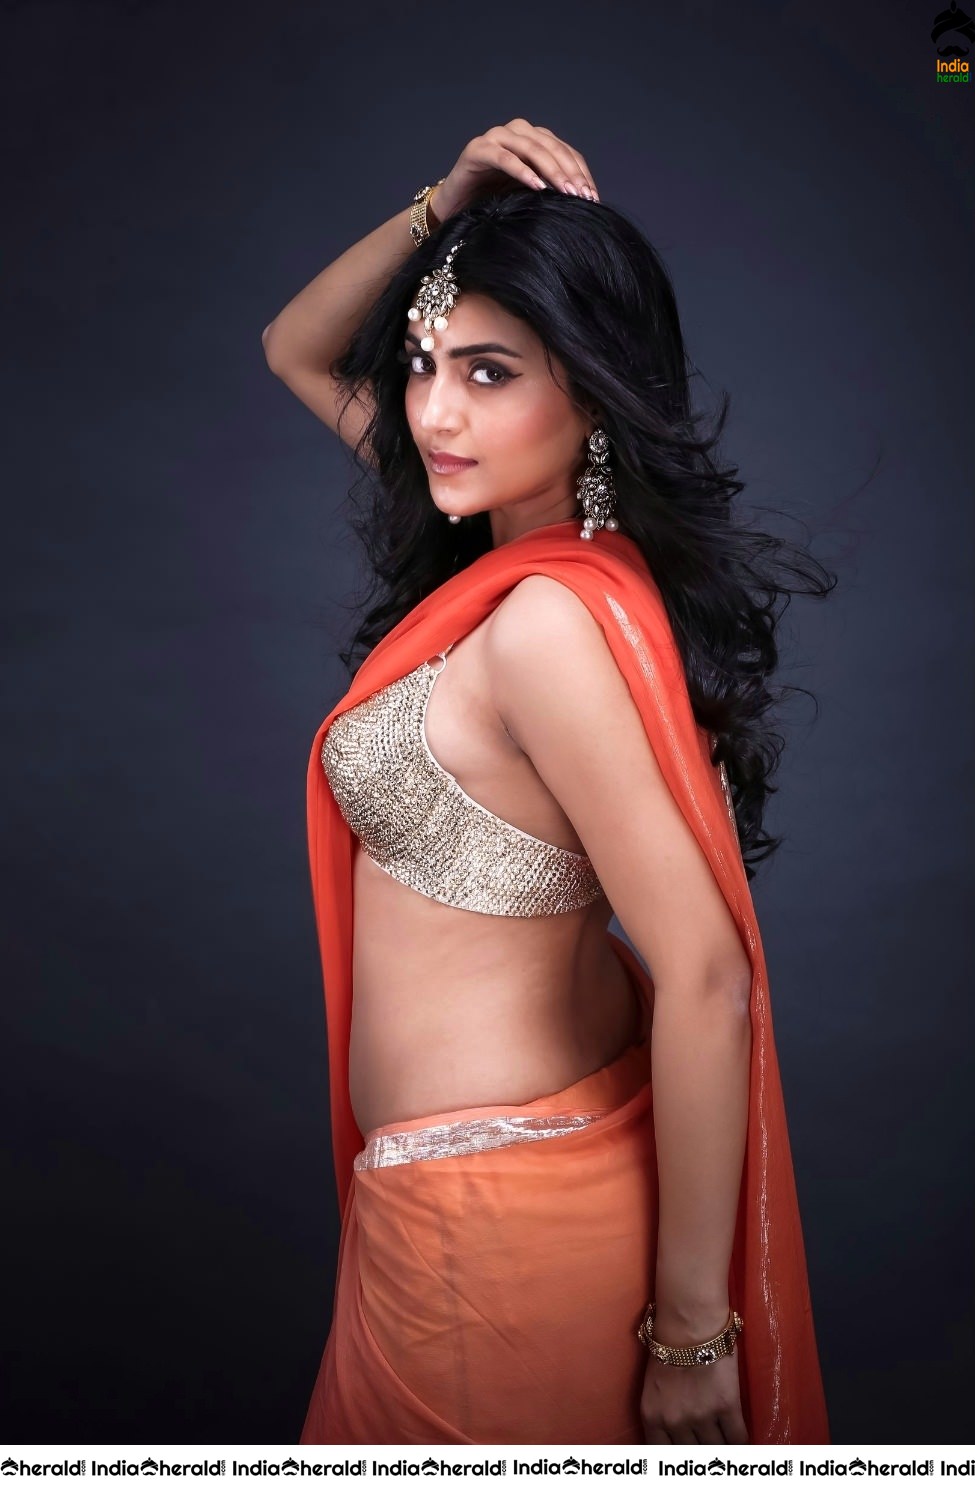 Avantika Mishra Sizzling Hot and Sexiest Photoshoot in Saree which will tempt your Mood